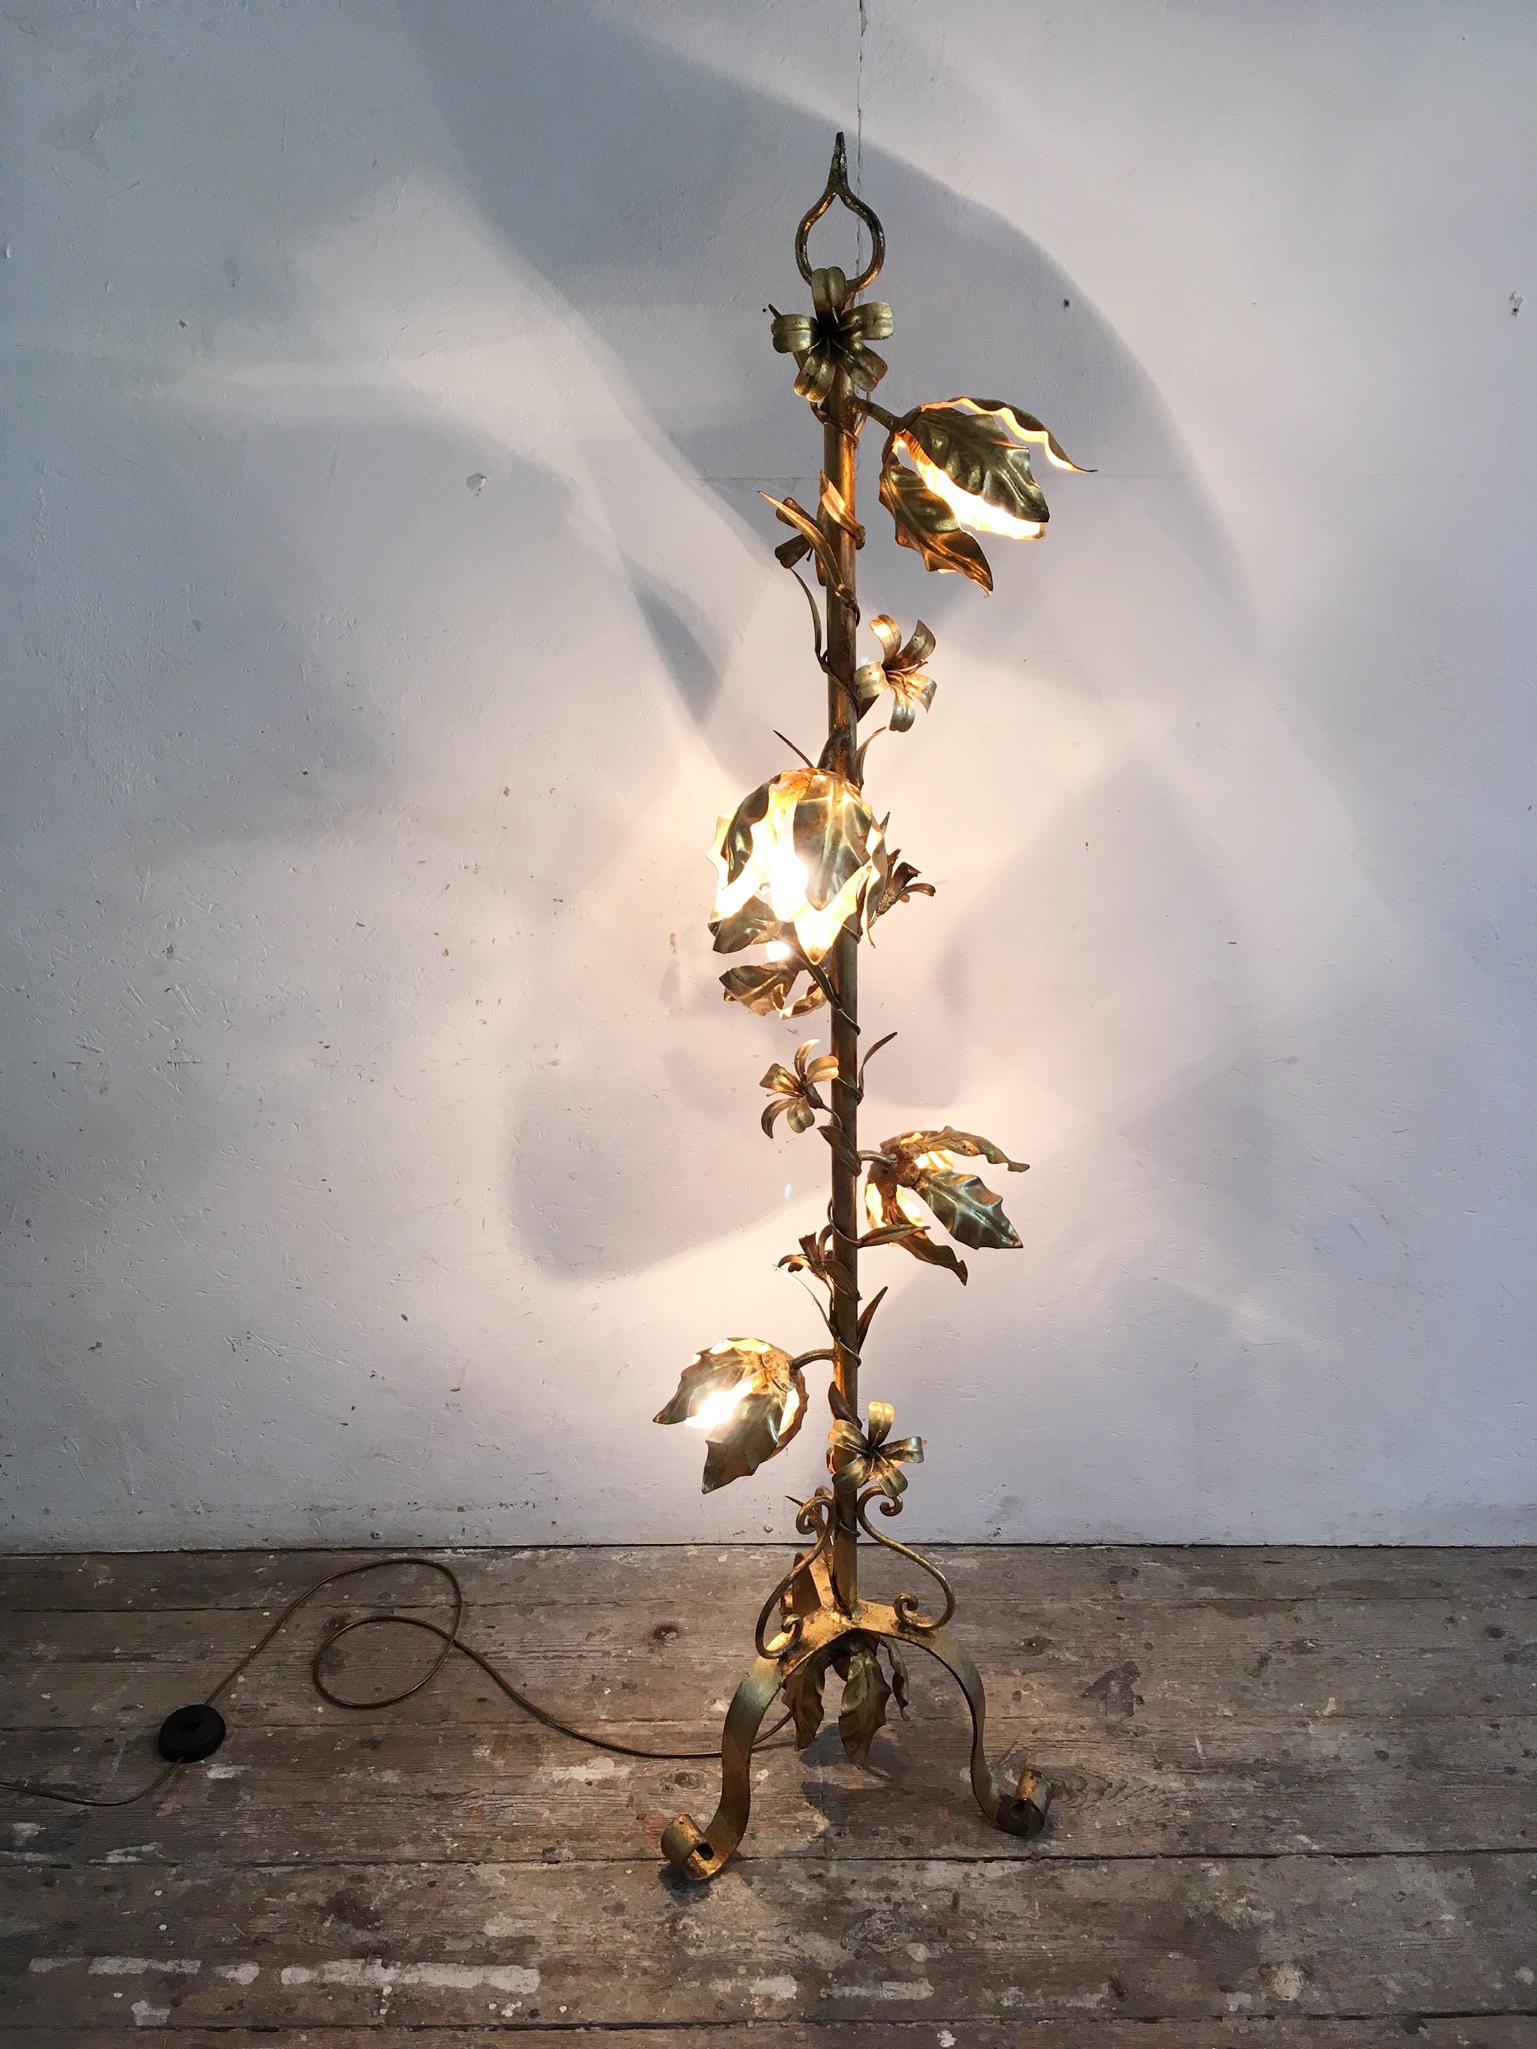 Vintage Italian gilt tole floor lamp, large flower buds, lily flowers and leaves twist around the central post. Five lamp holders, one per bud. The lamp is in very good condition, the gilt is strong and bright in colour and finish. There is a foot